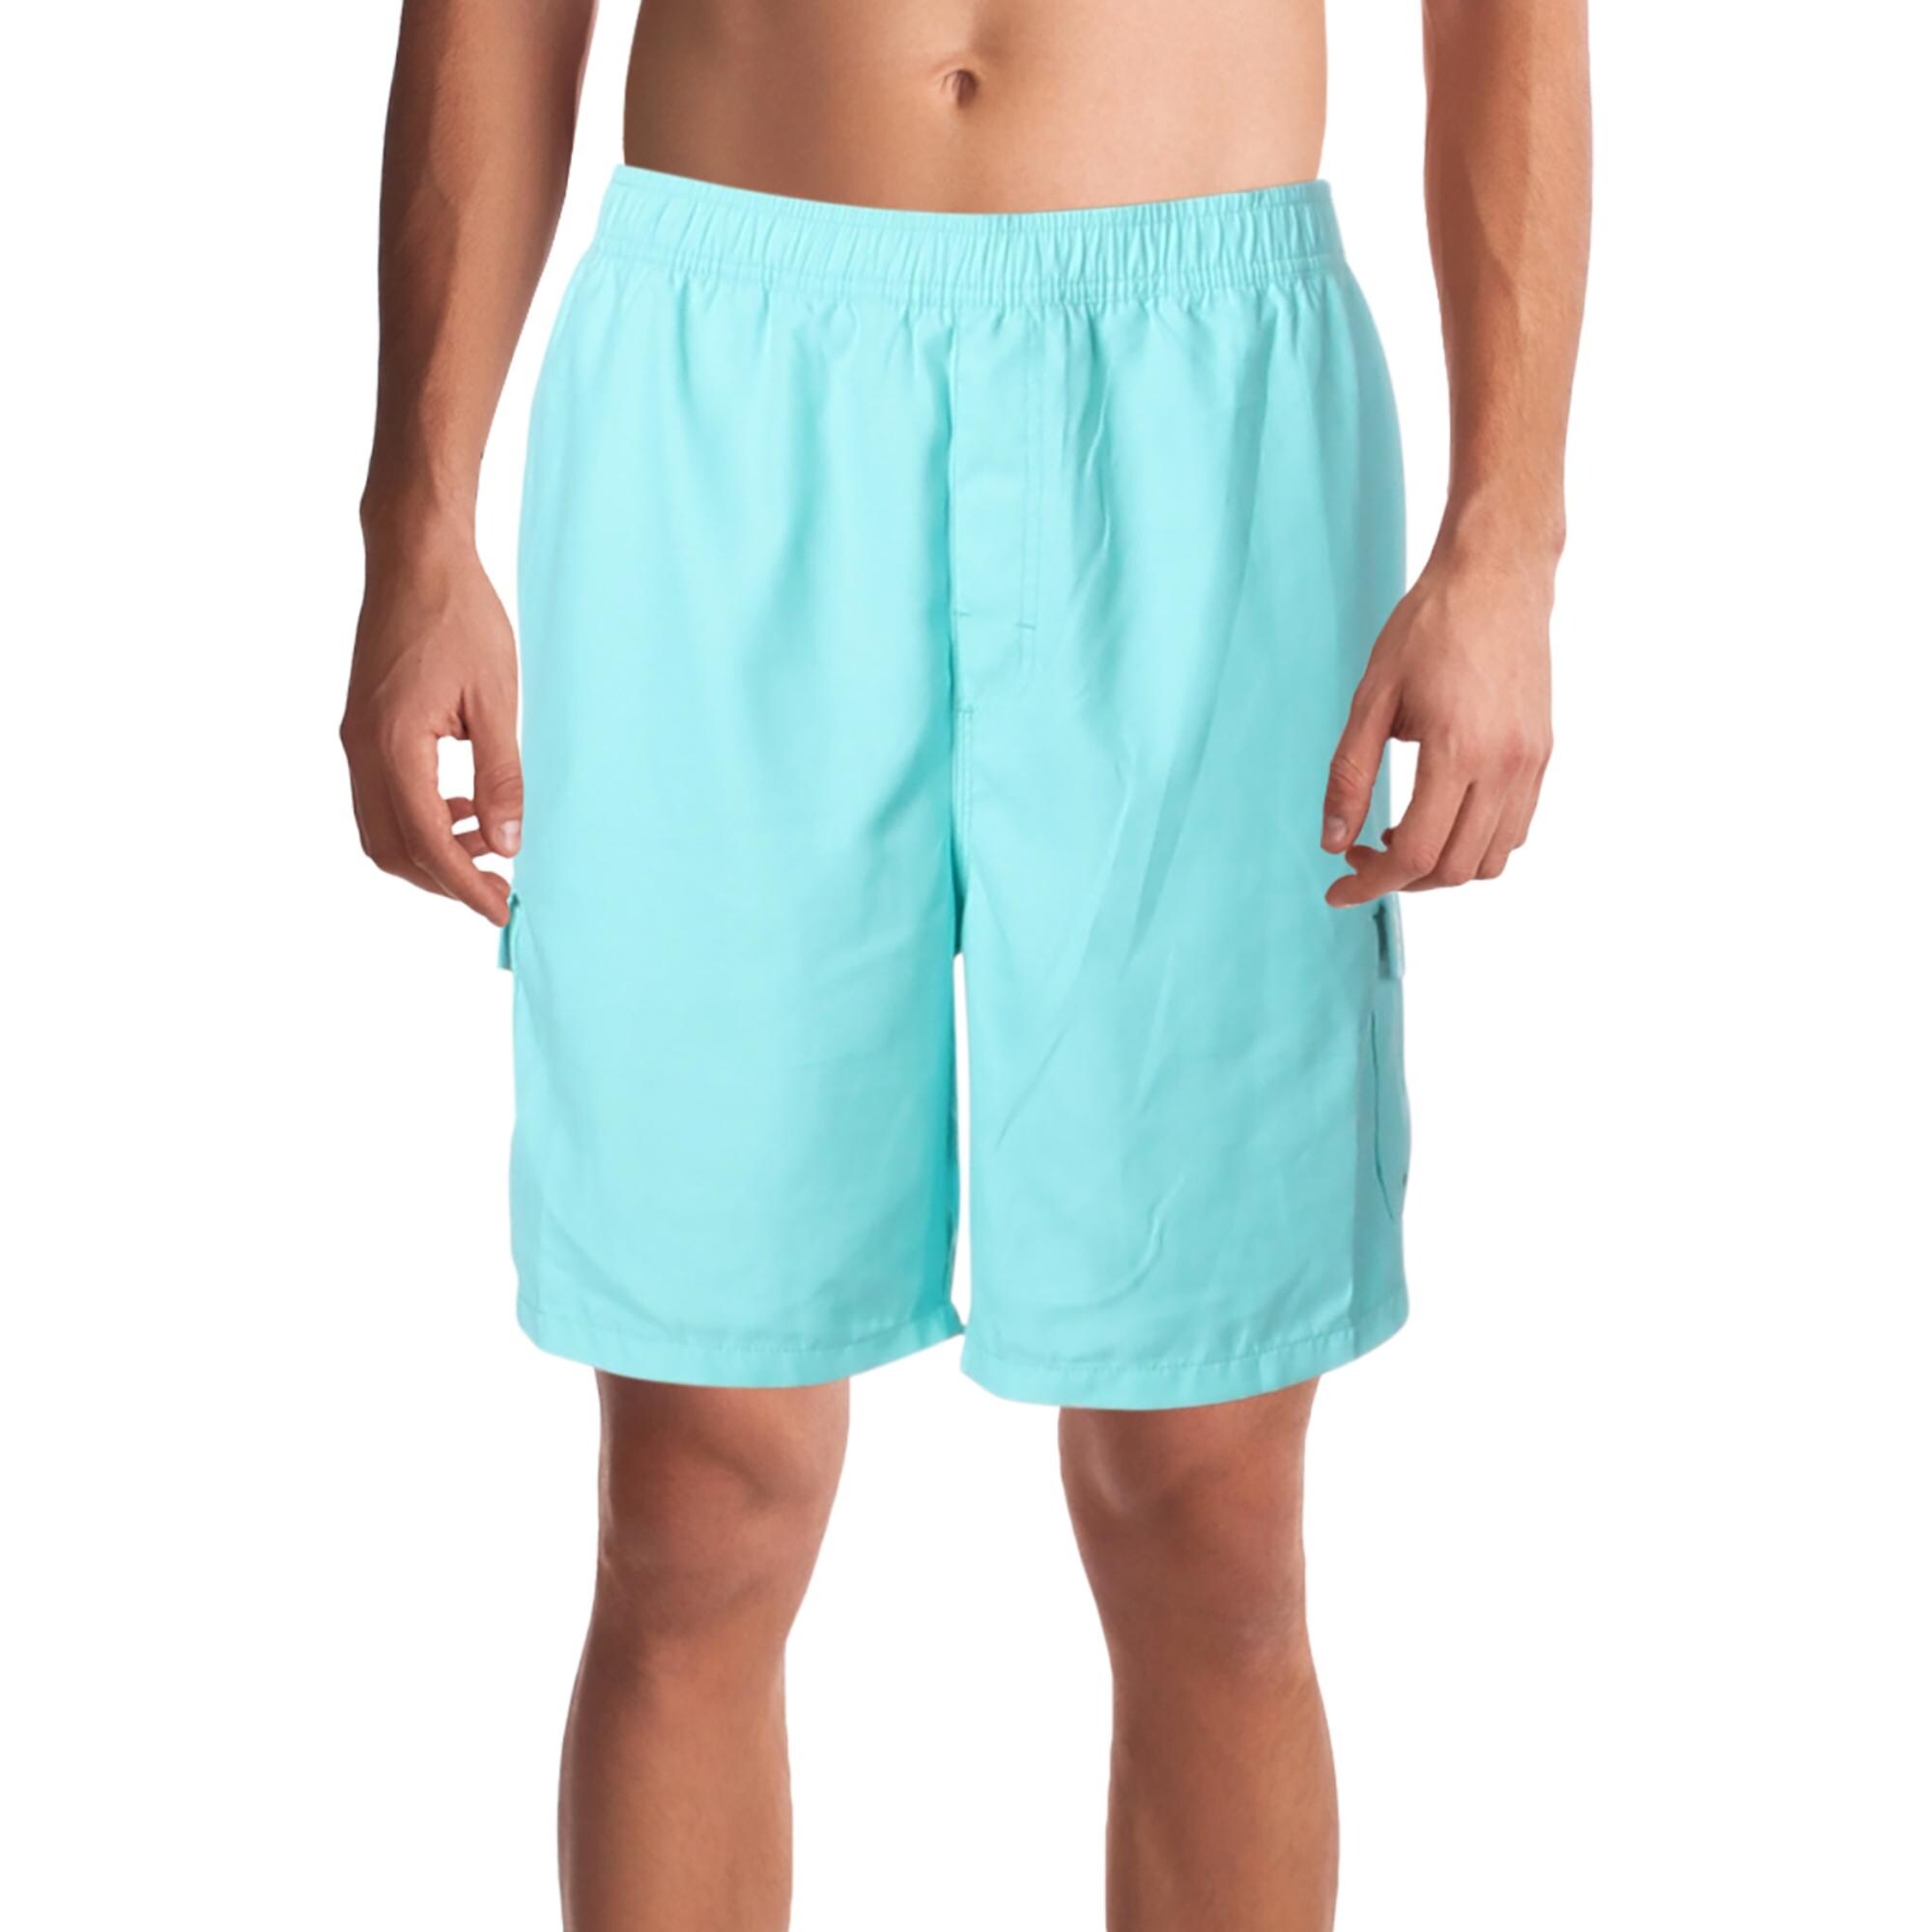 MAPOOL SWIMMING TRONK BRIEF 7 colors SHORTS MED QUIKSILVER MEN'S 